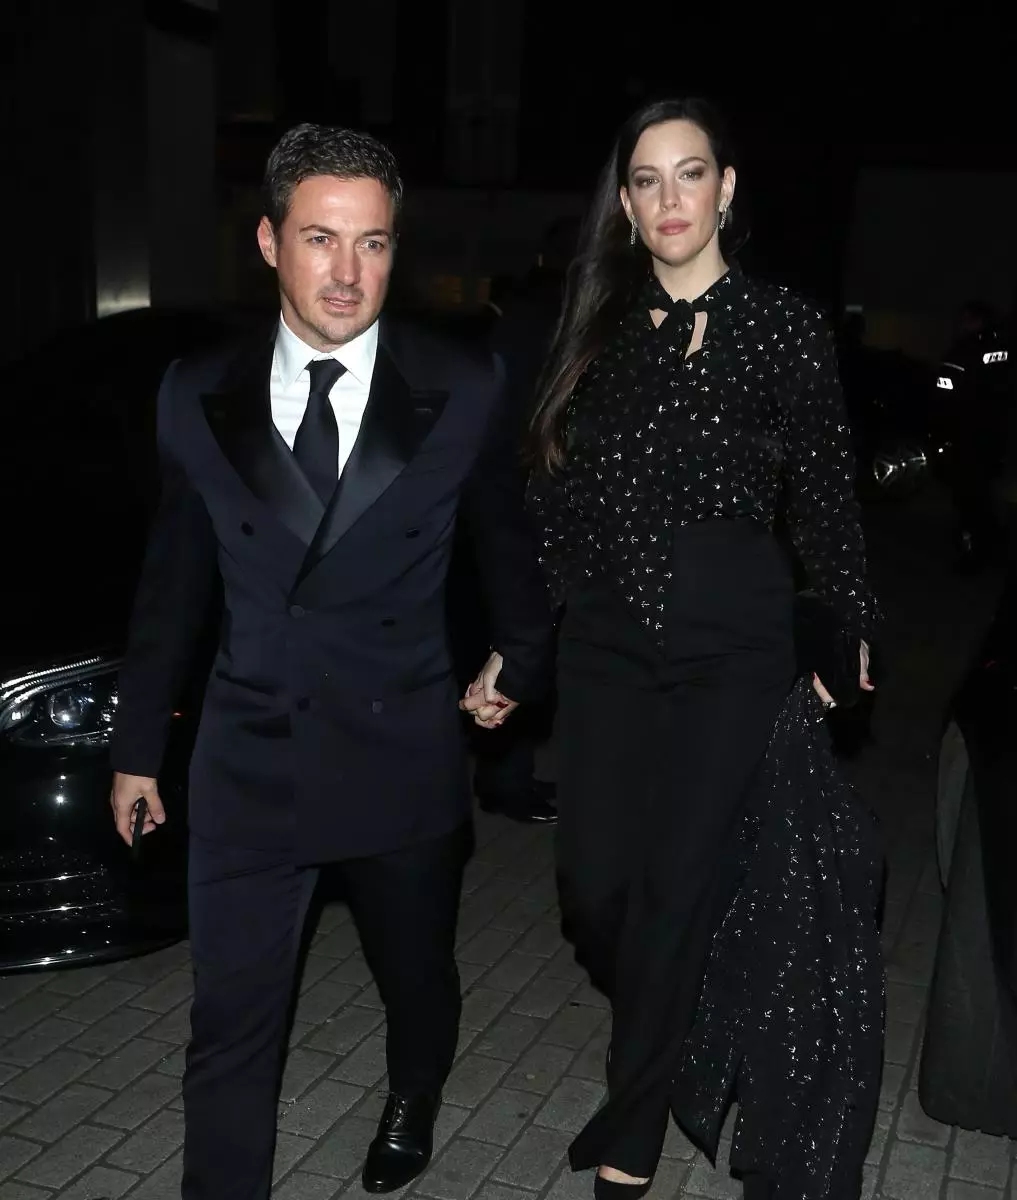 Liv Tyler returned to England to her husband after rumors about divorce 47967_1